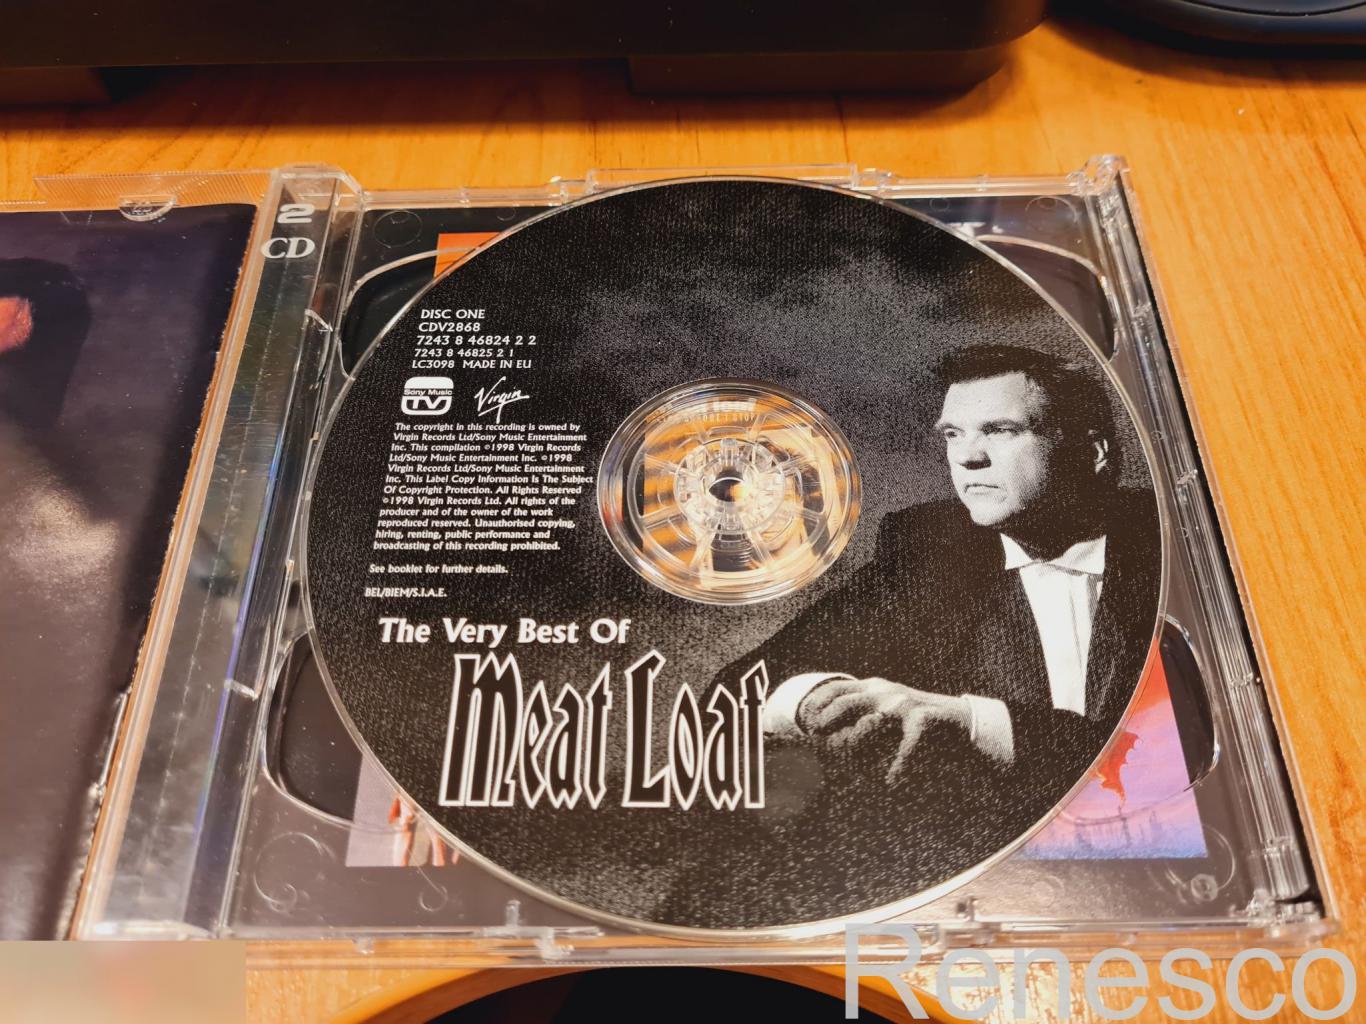 Meat Loaf ?– The Very Best Of Meat Loaf (Europe) (1998) 4